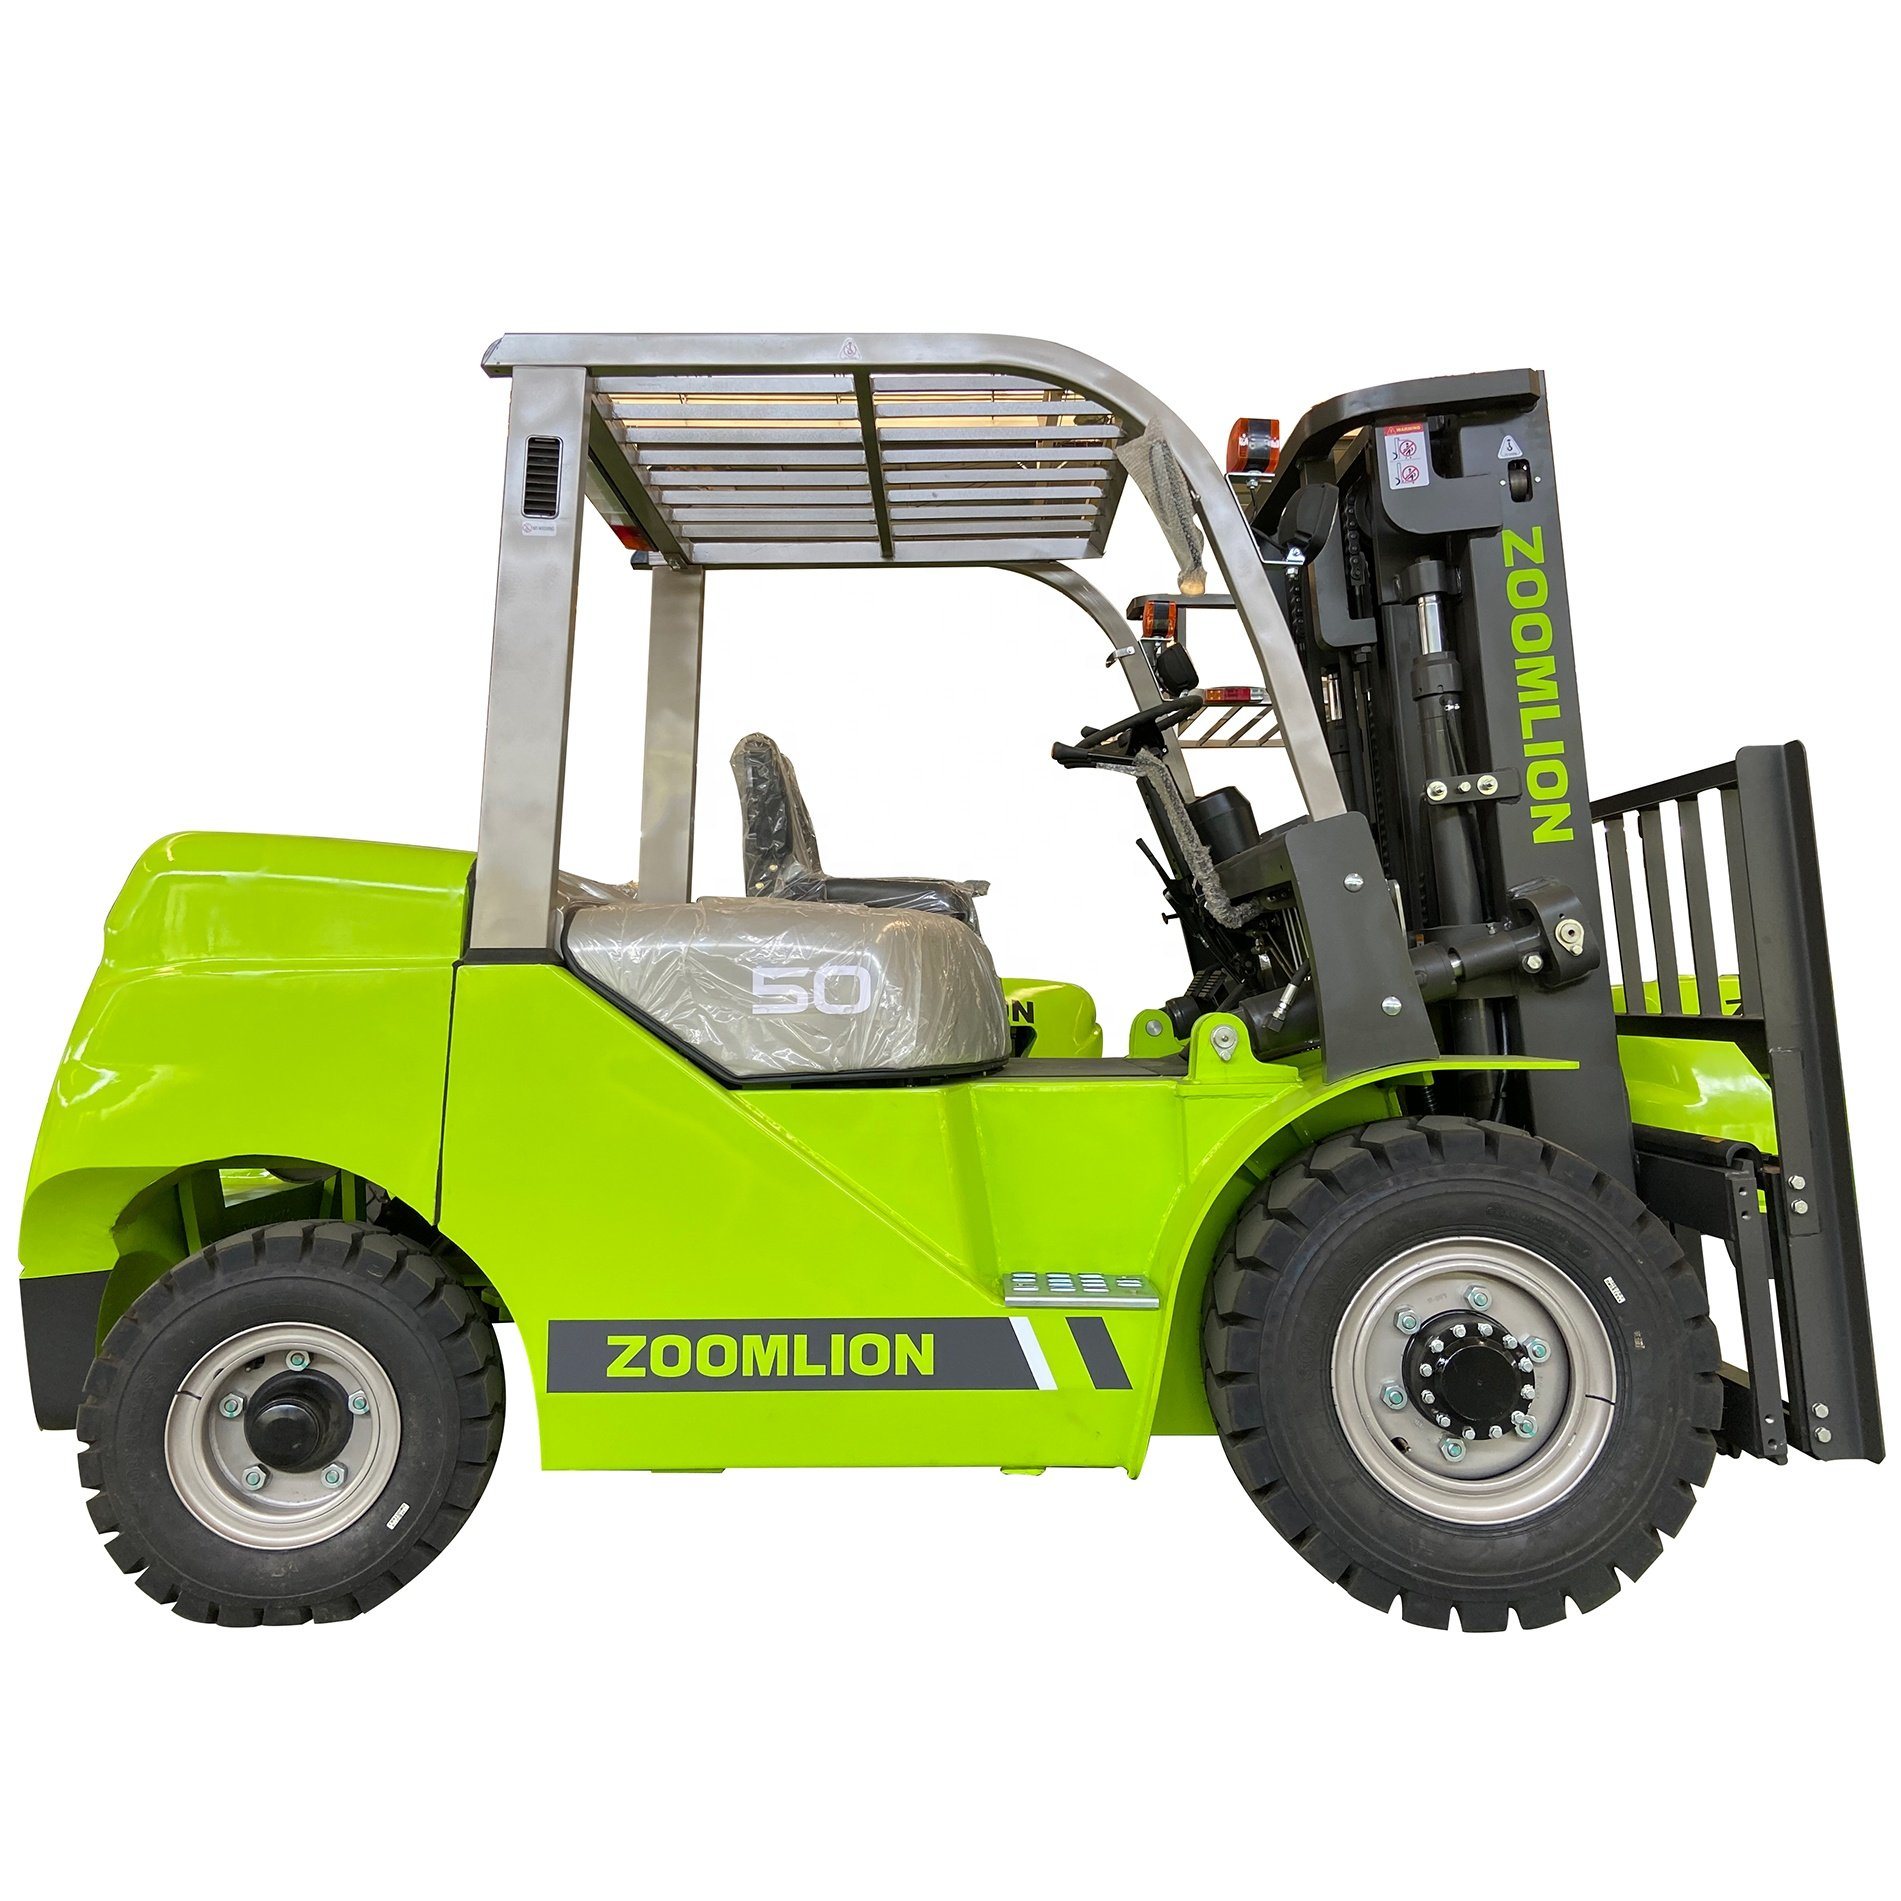 Hot Sale Model Zoomlion Internal Combustion Forklift Diesel Fd40 with Full Free Triple Mast